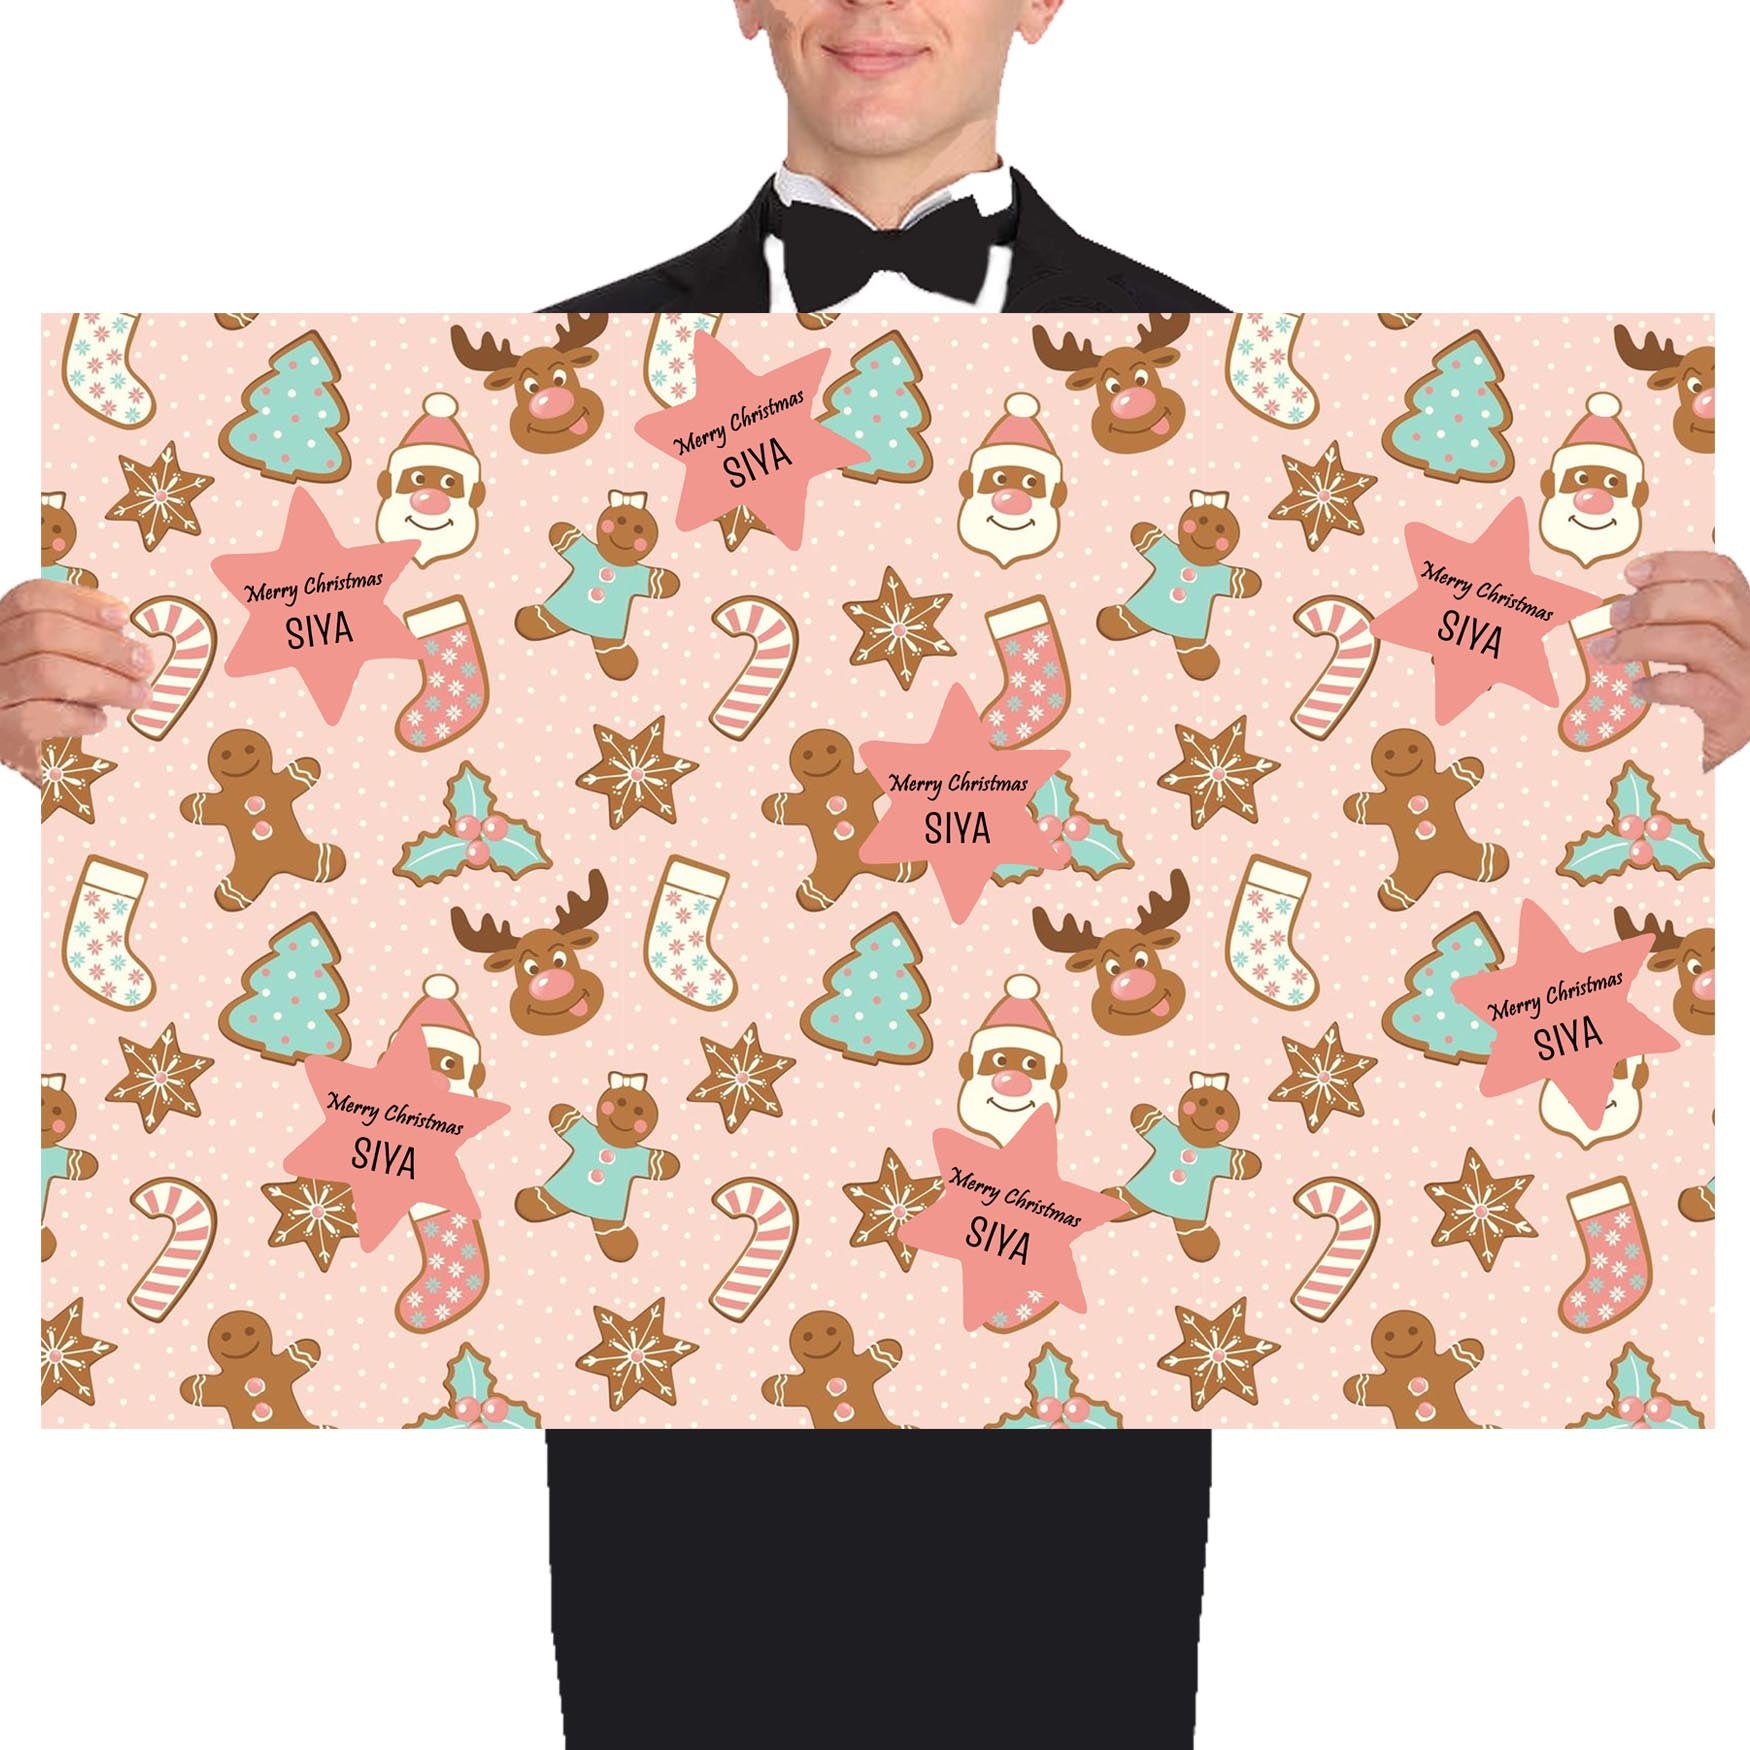 Personalised Merry Christmas Gift Wrapping Paper -Pink Gingerbread Man Theme - 5 Large Sheets